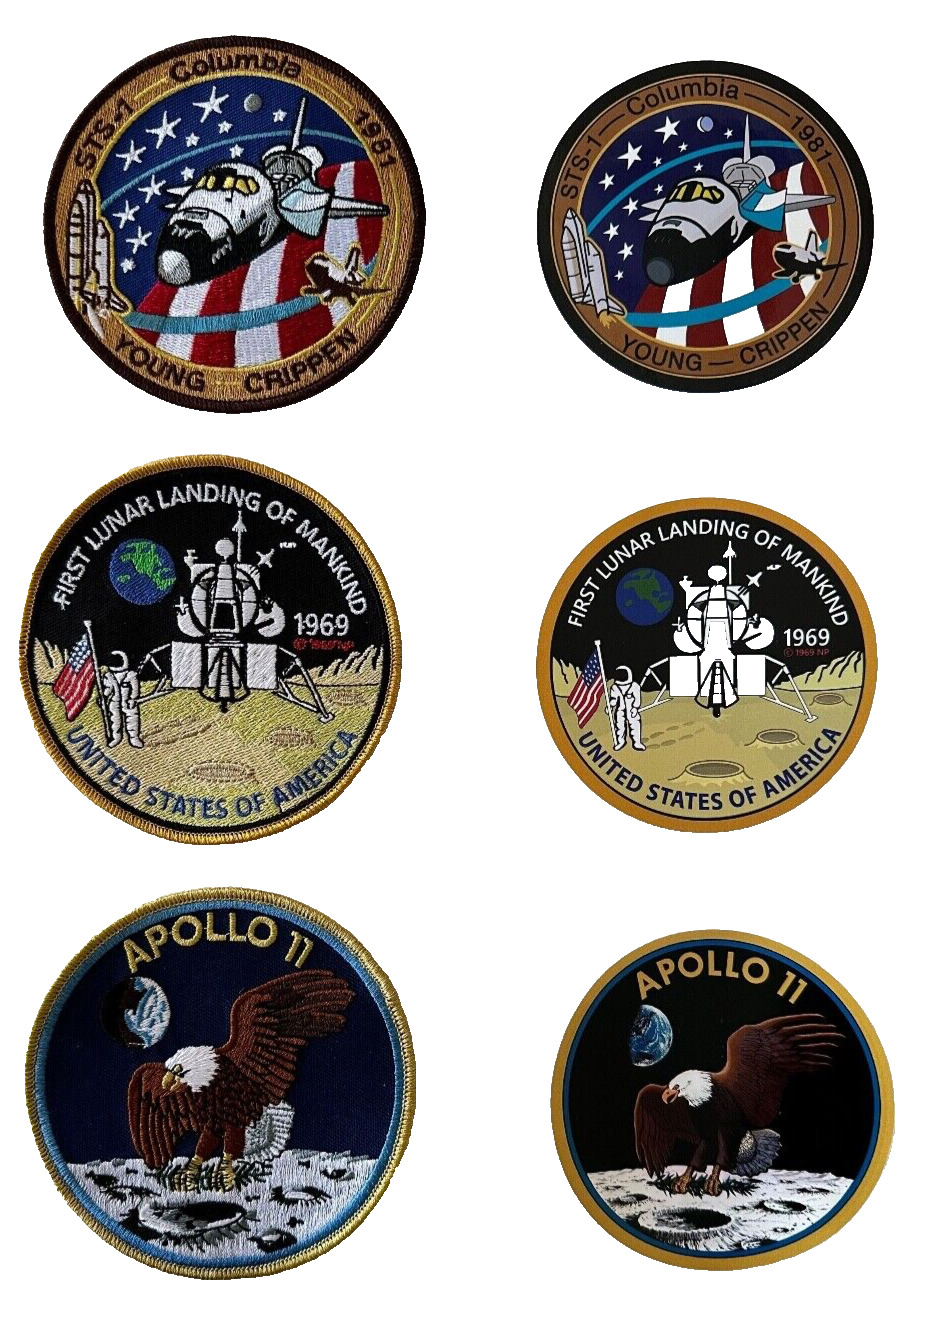 NASA...Moon Landing & Columbia STS-1 Space Shuttle.... Patches + Stickers